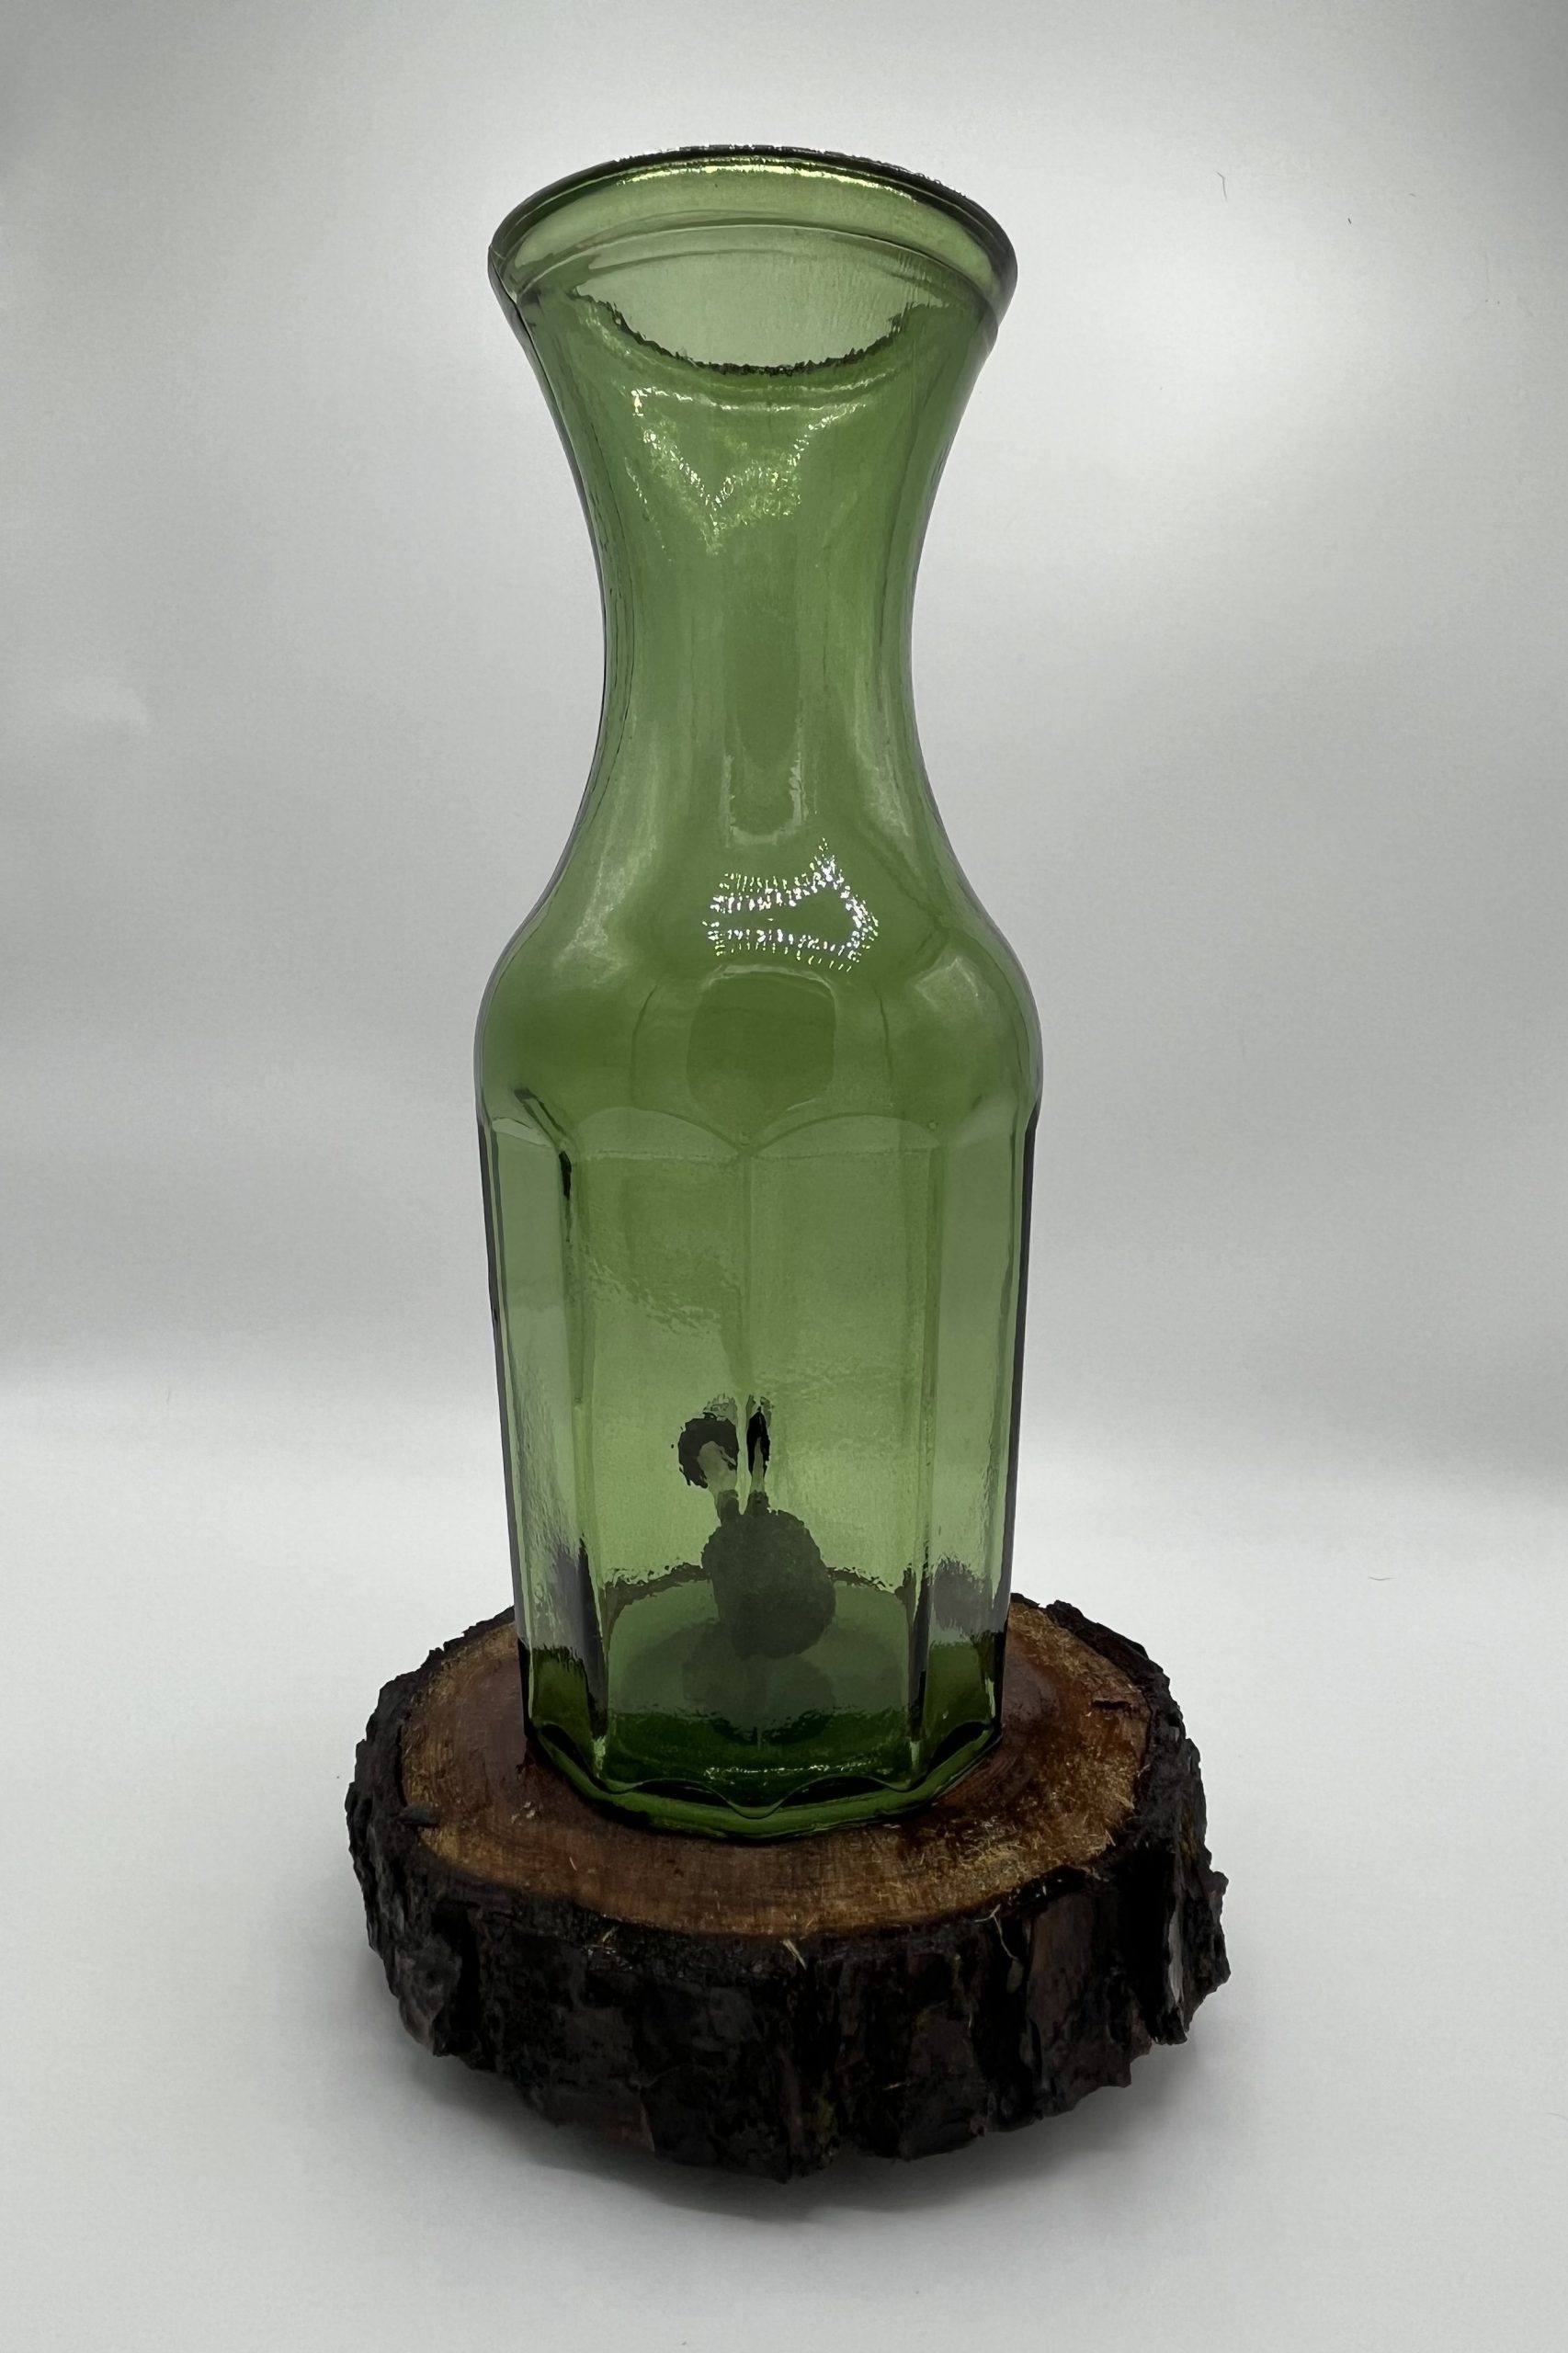 Green Glass; Natural Wood Epoxied